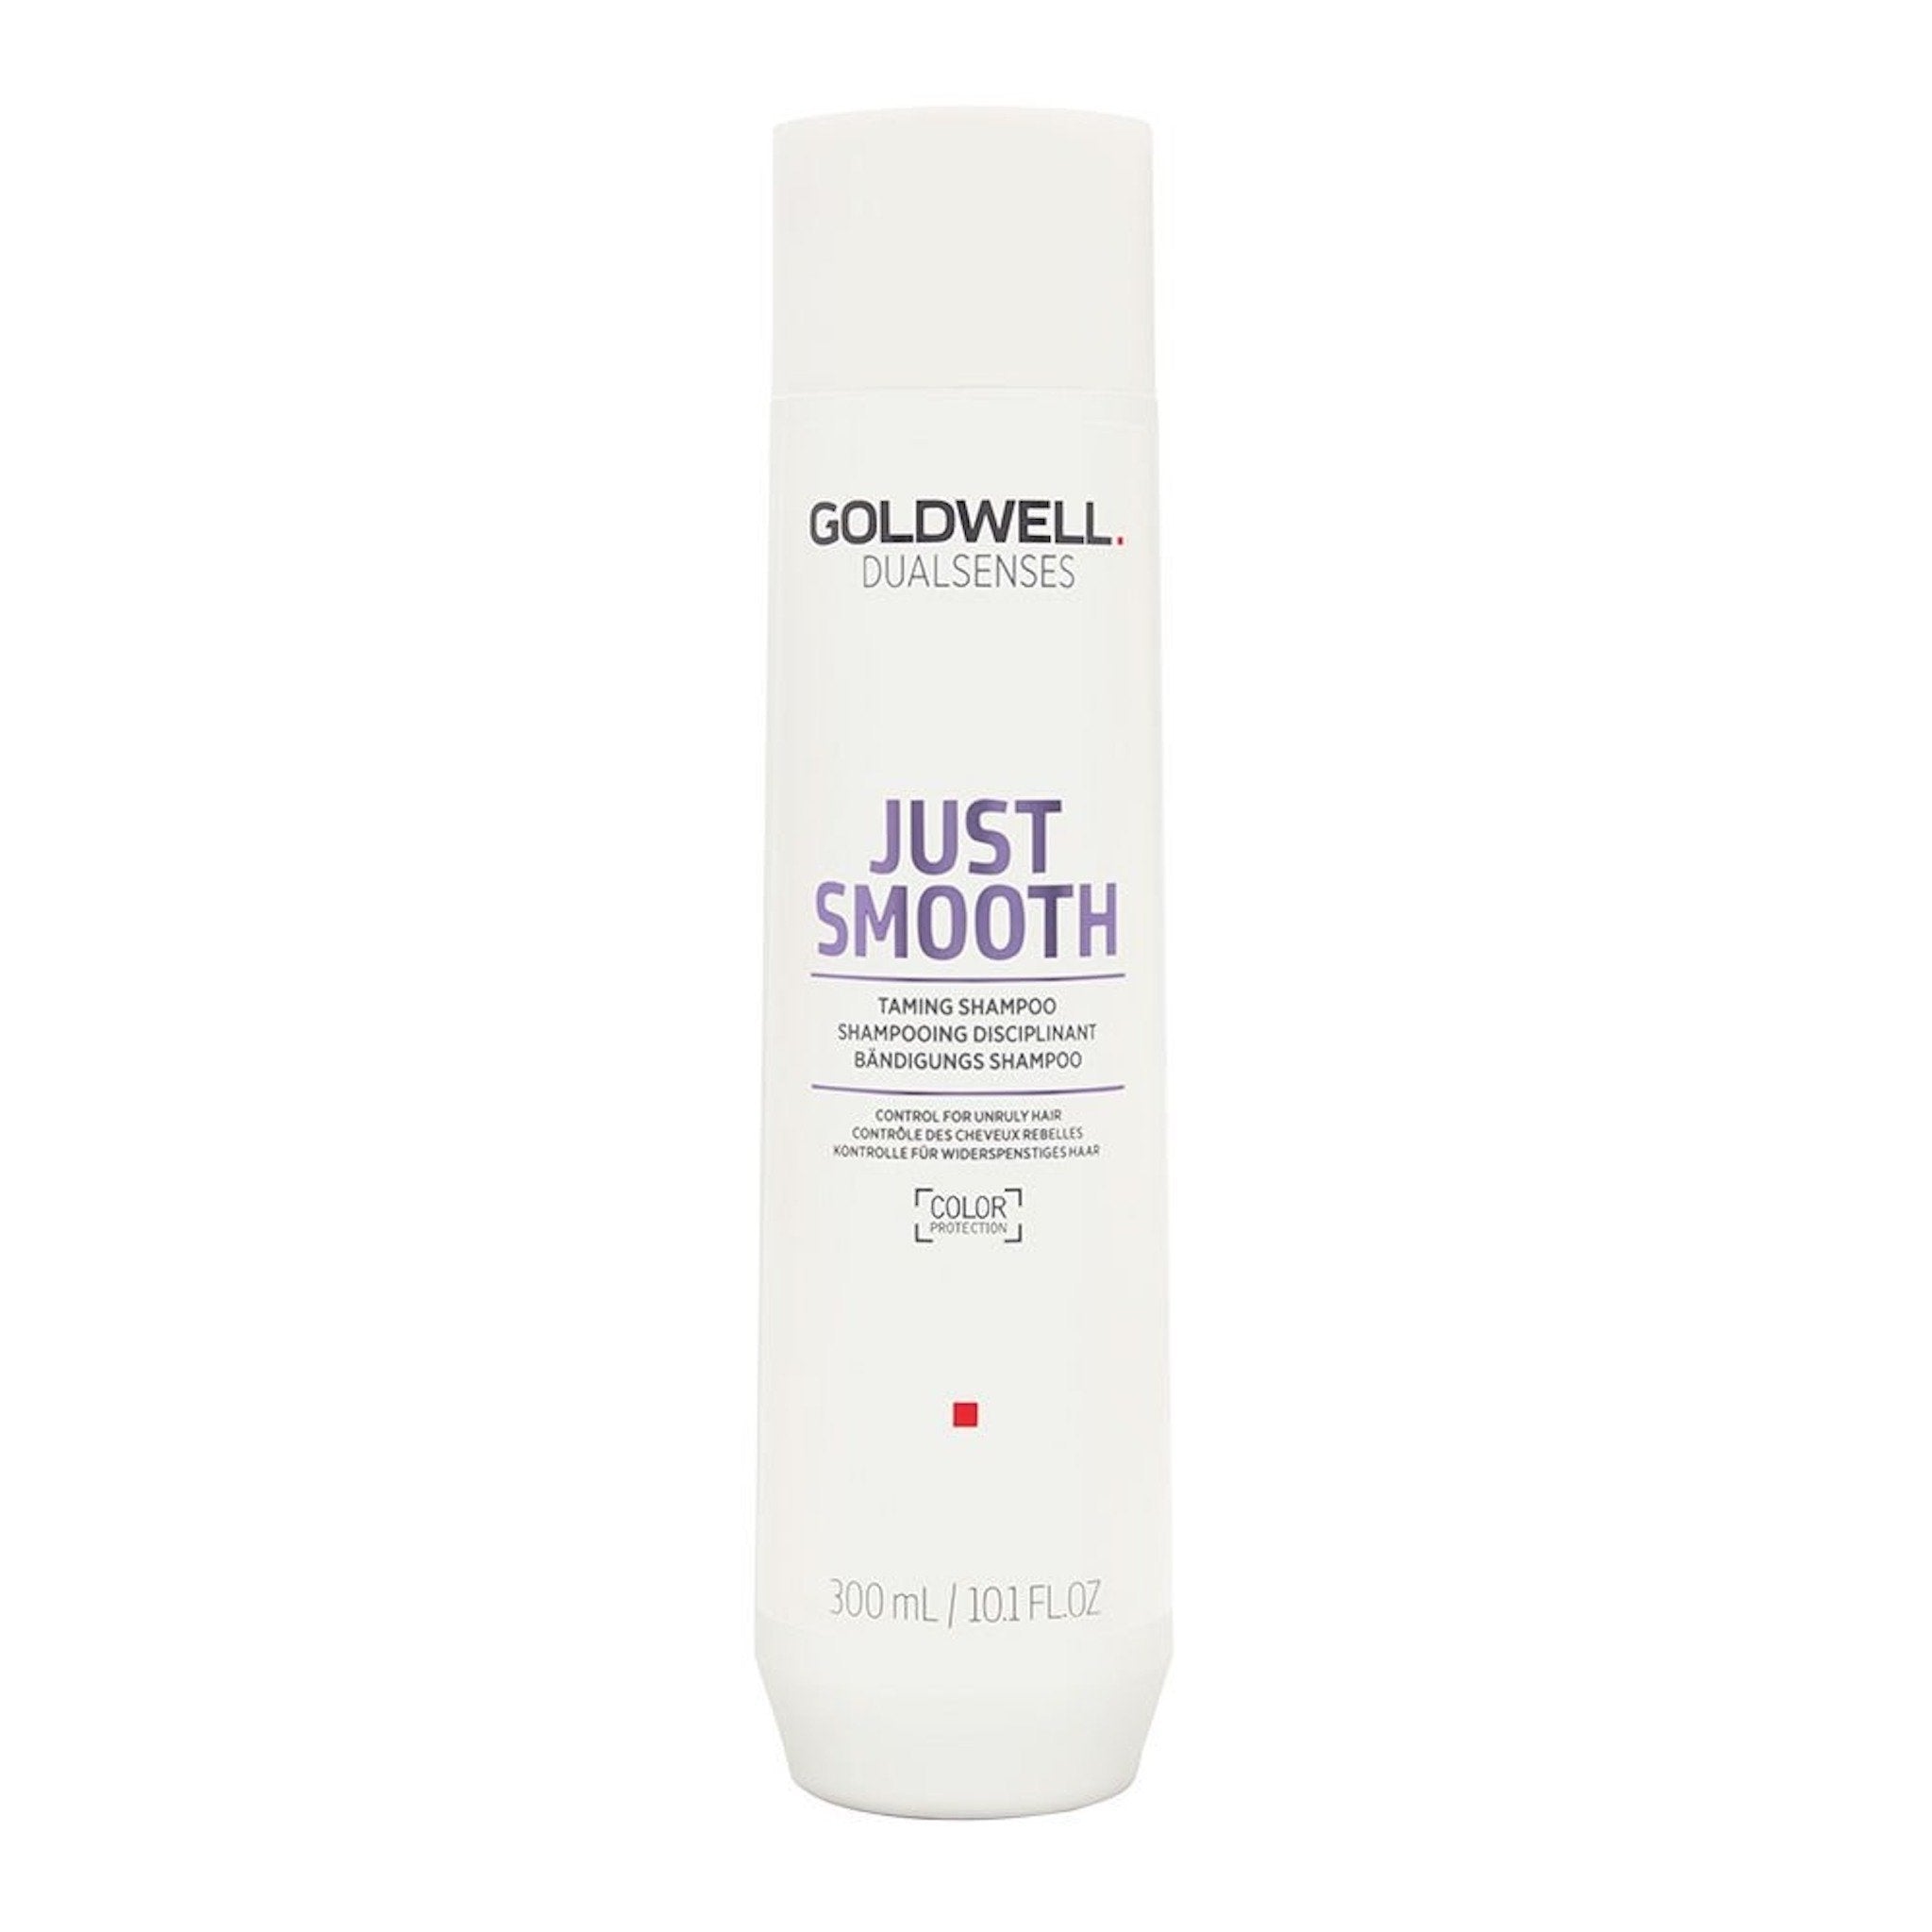 Goldwell. Just Smooth Shampoing Apprivoisant - 300 ml - Concept C. Shop